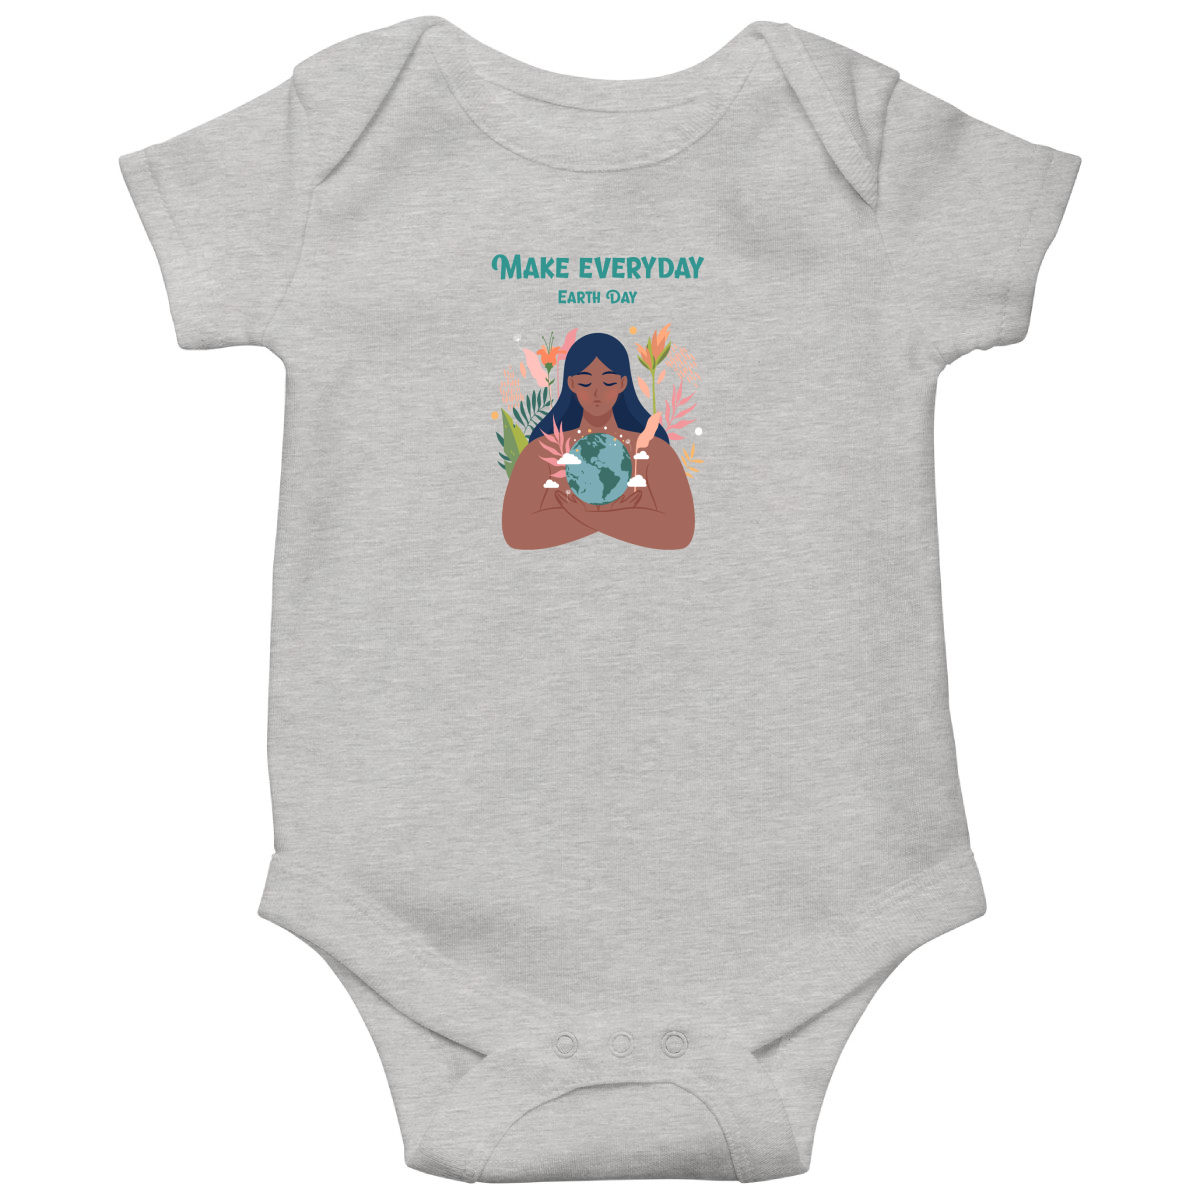 Earth Day Everyday Baby Bodysuits | Gray